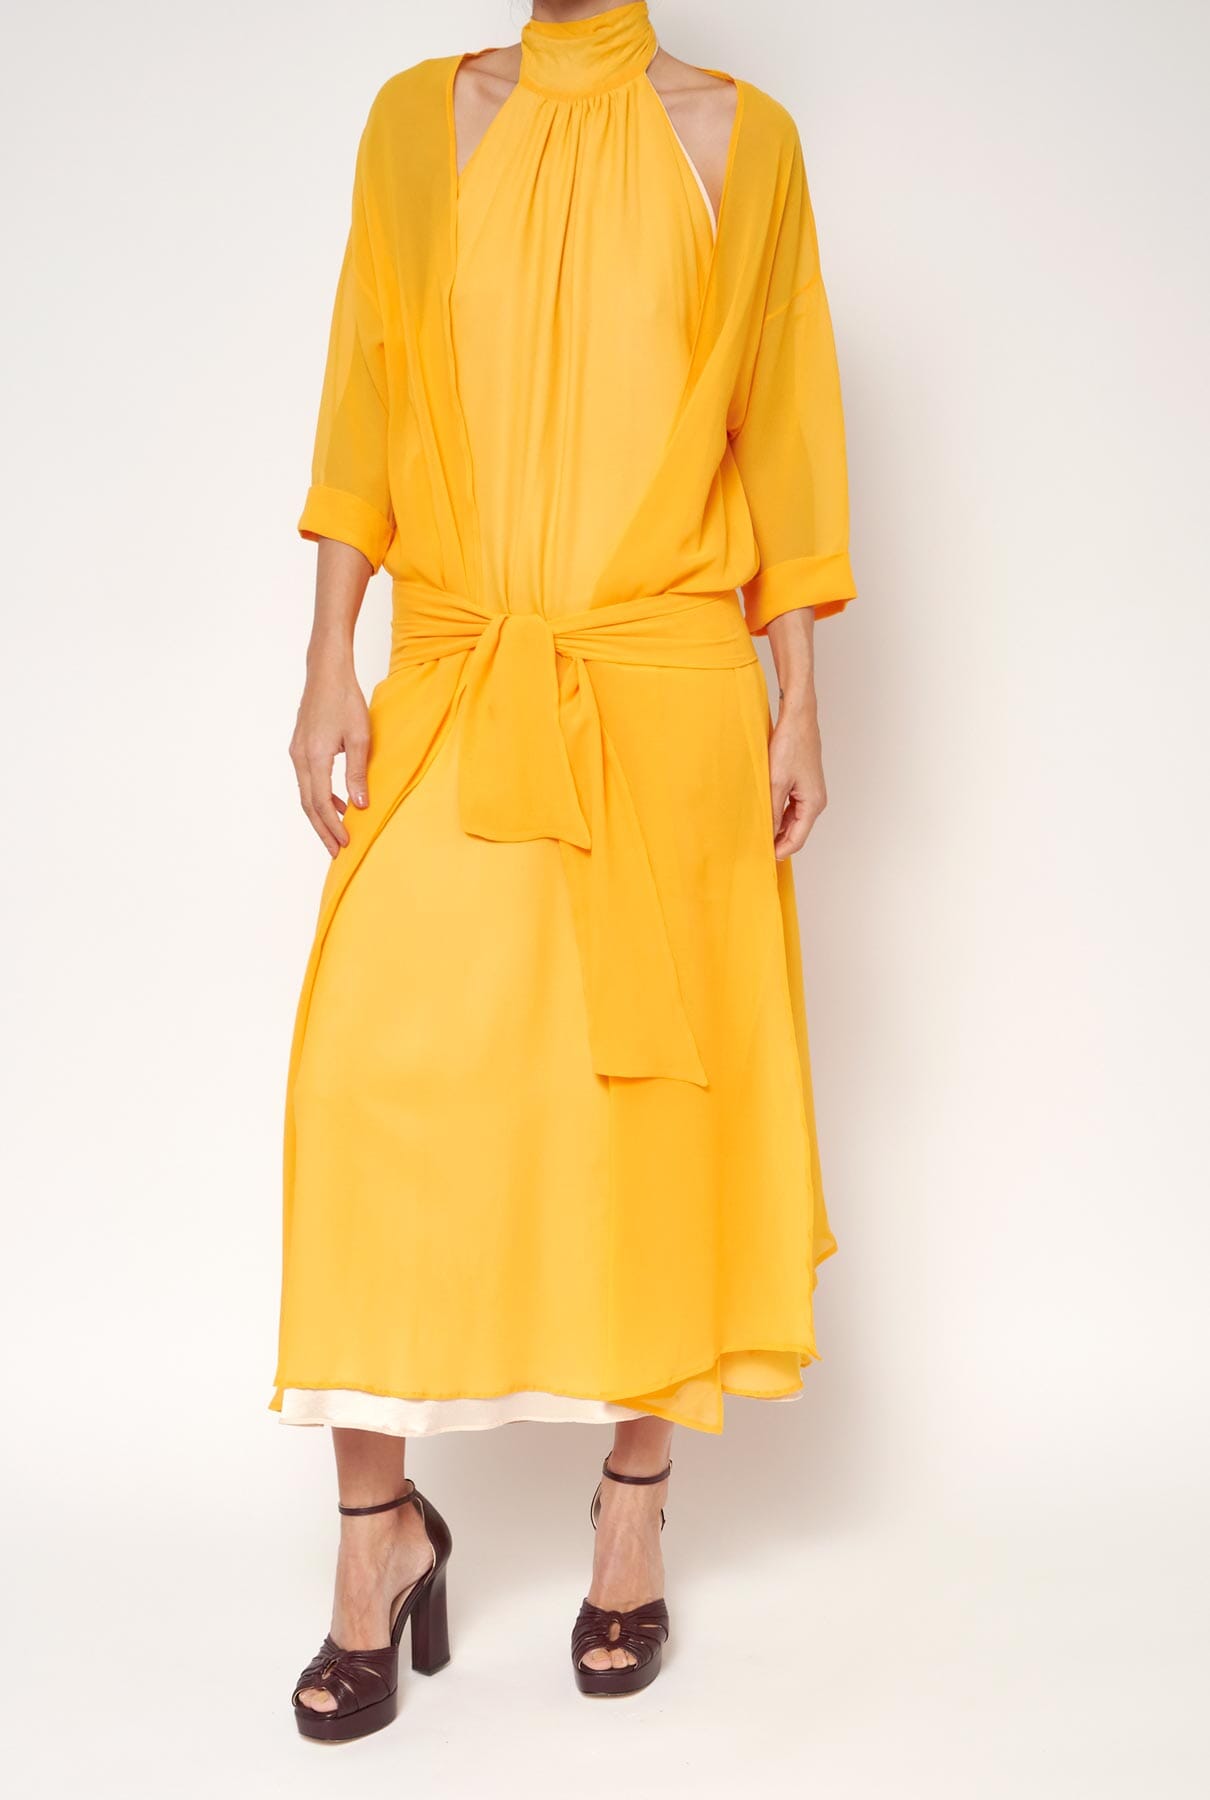 Persefone Overdress Yellow Capes & shawls Atelier Aletheia 